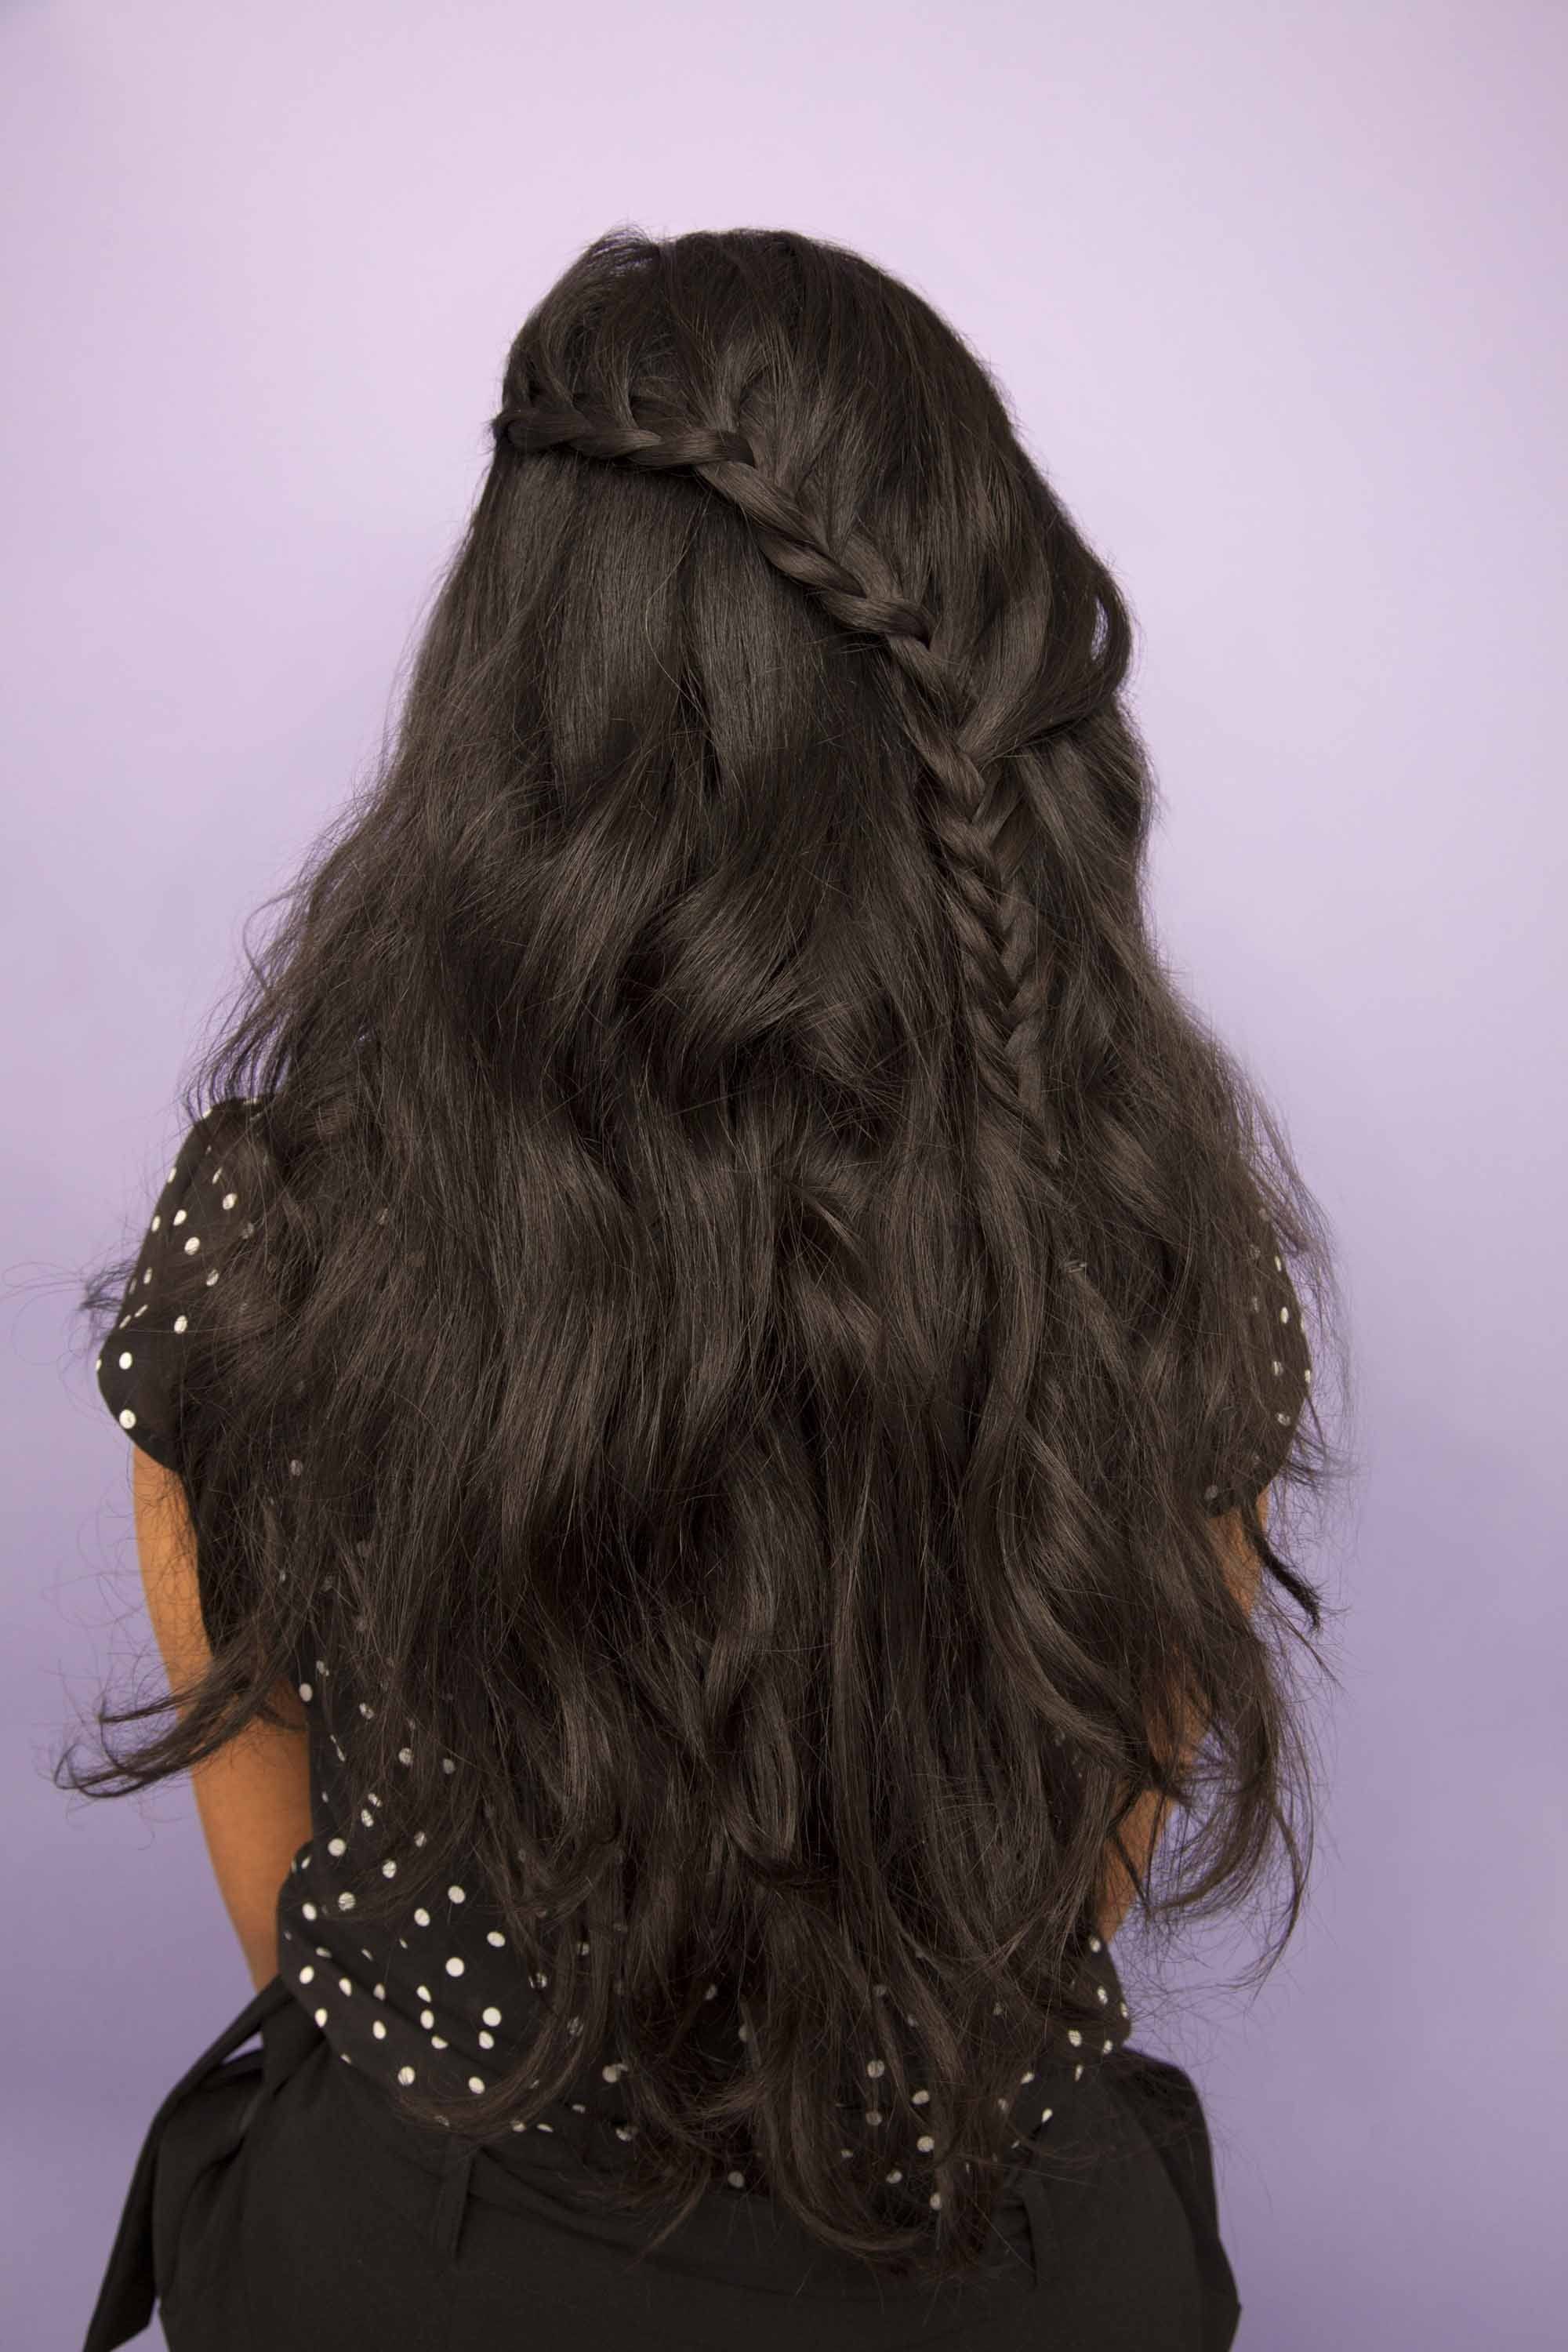 37 Gorgeous Braided Hairstyles That Will Take Your Look to the Next Level